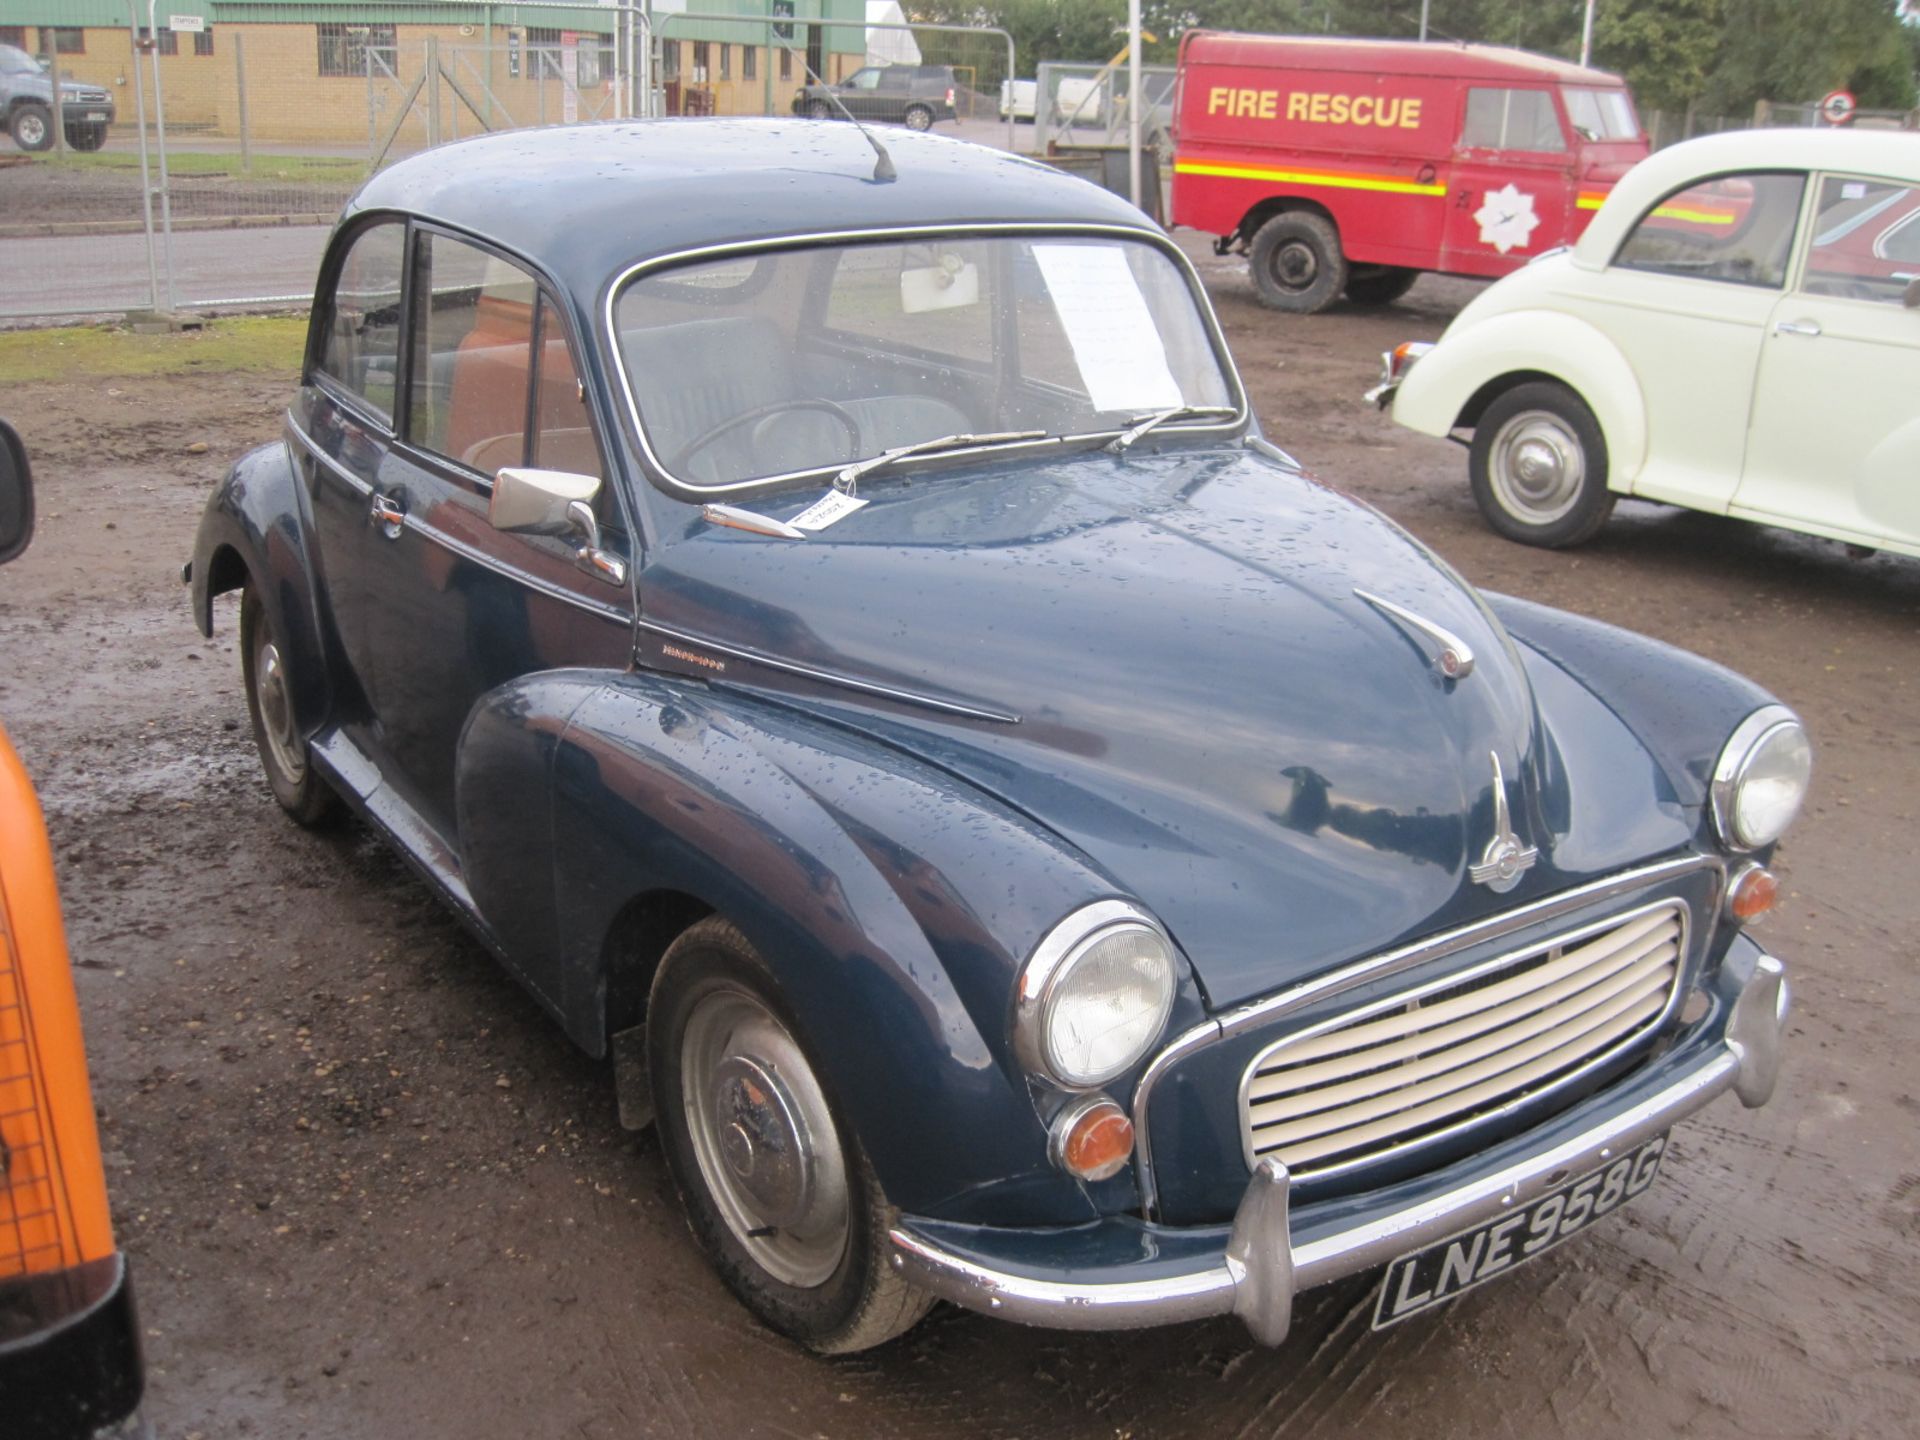 1968 Morris Minor 2 door saloon.Reg.No. LNE 958G4 owners from new, last 2 owners have been in